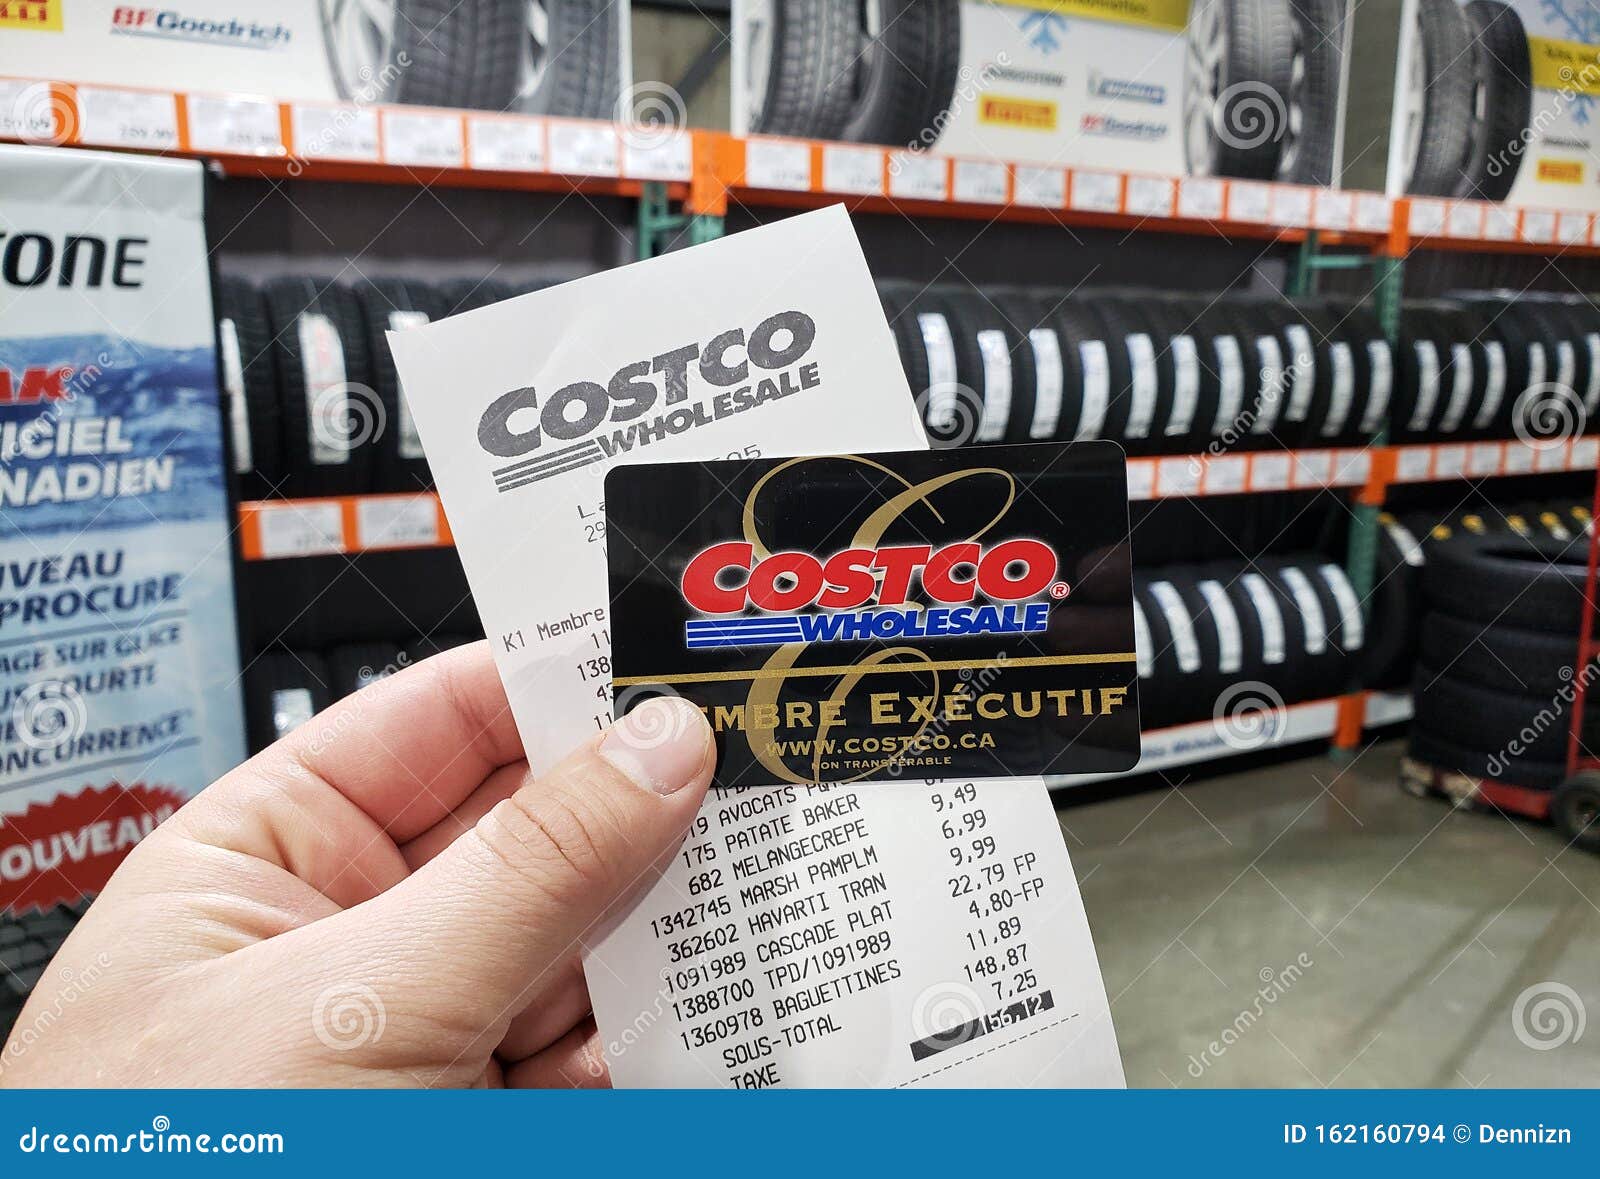 How much does a costco membership cost in canada